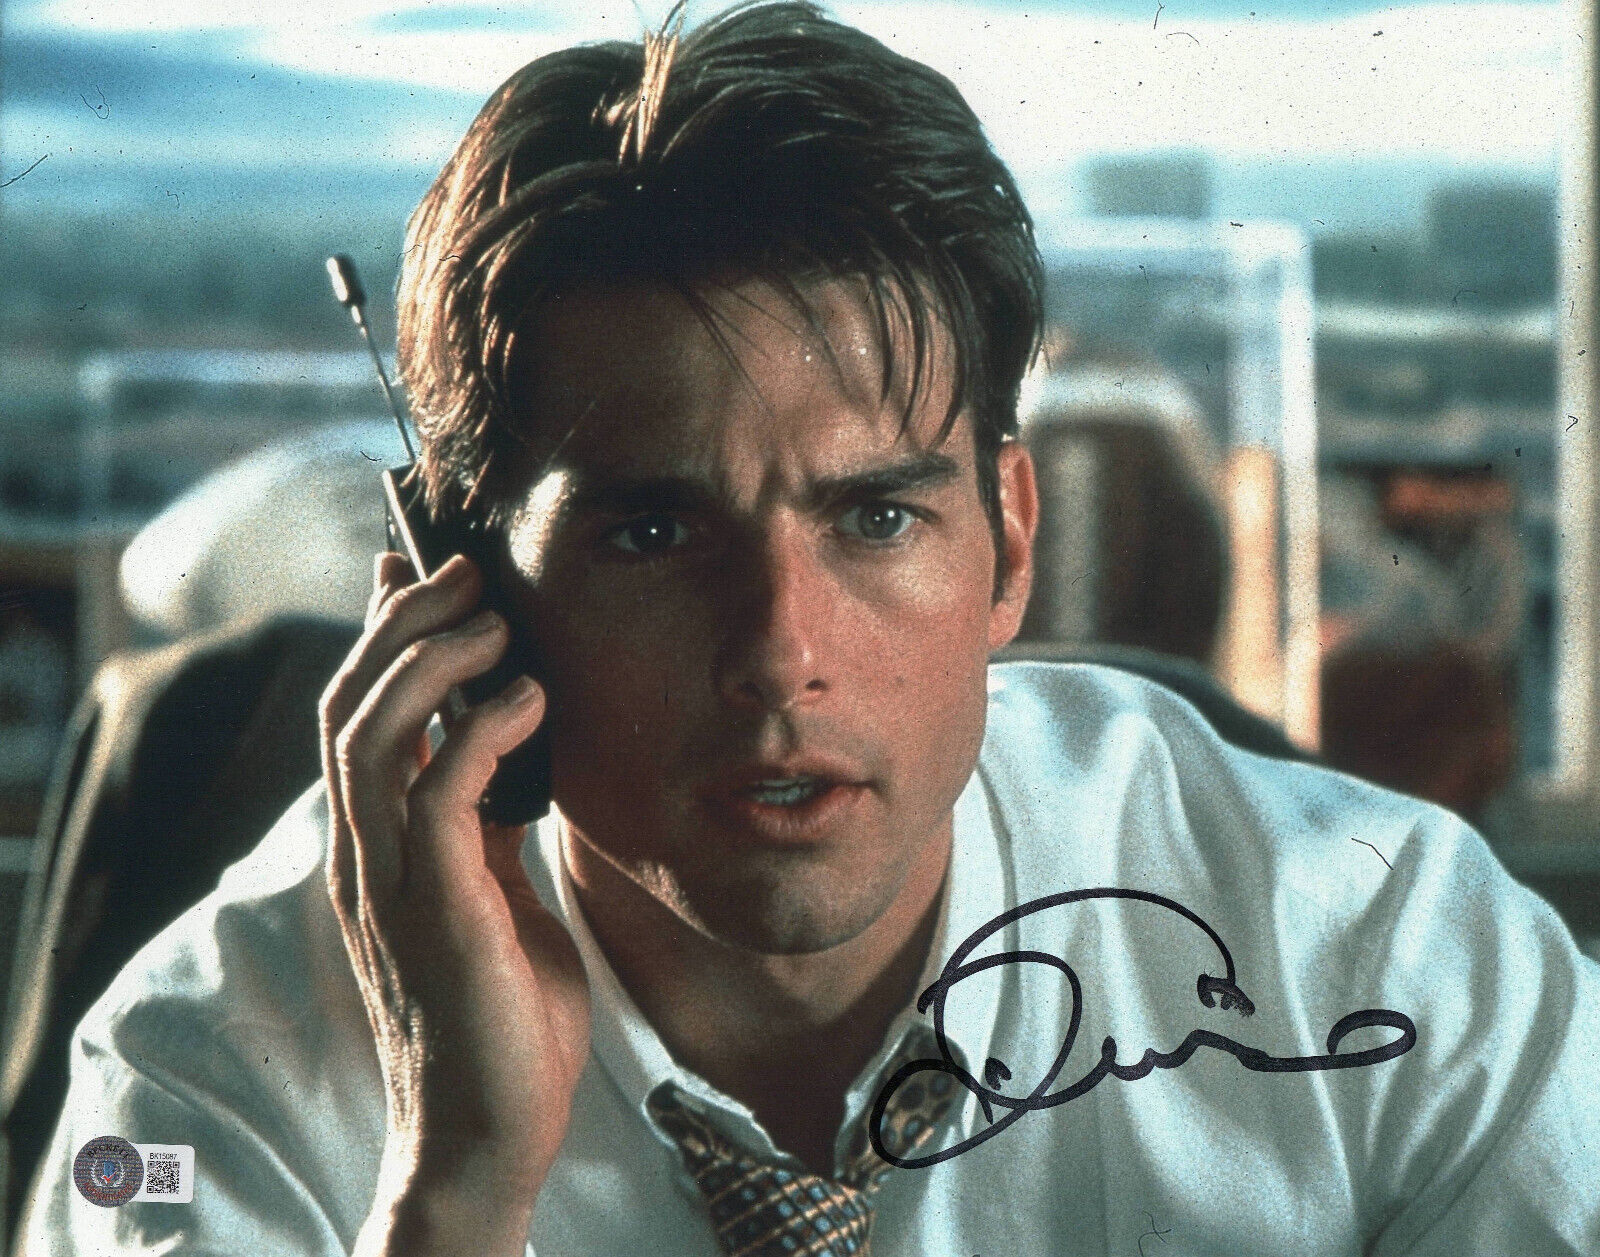 TOM CRUISE SIGNED AUTOGRAPH JERRY MAGUIRE 11X14 PHOTO BECKETT BAS